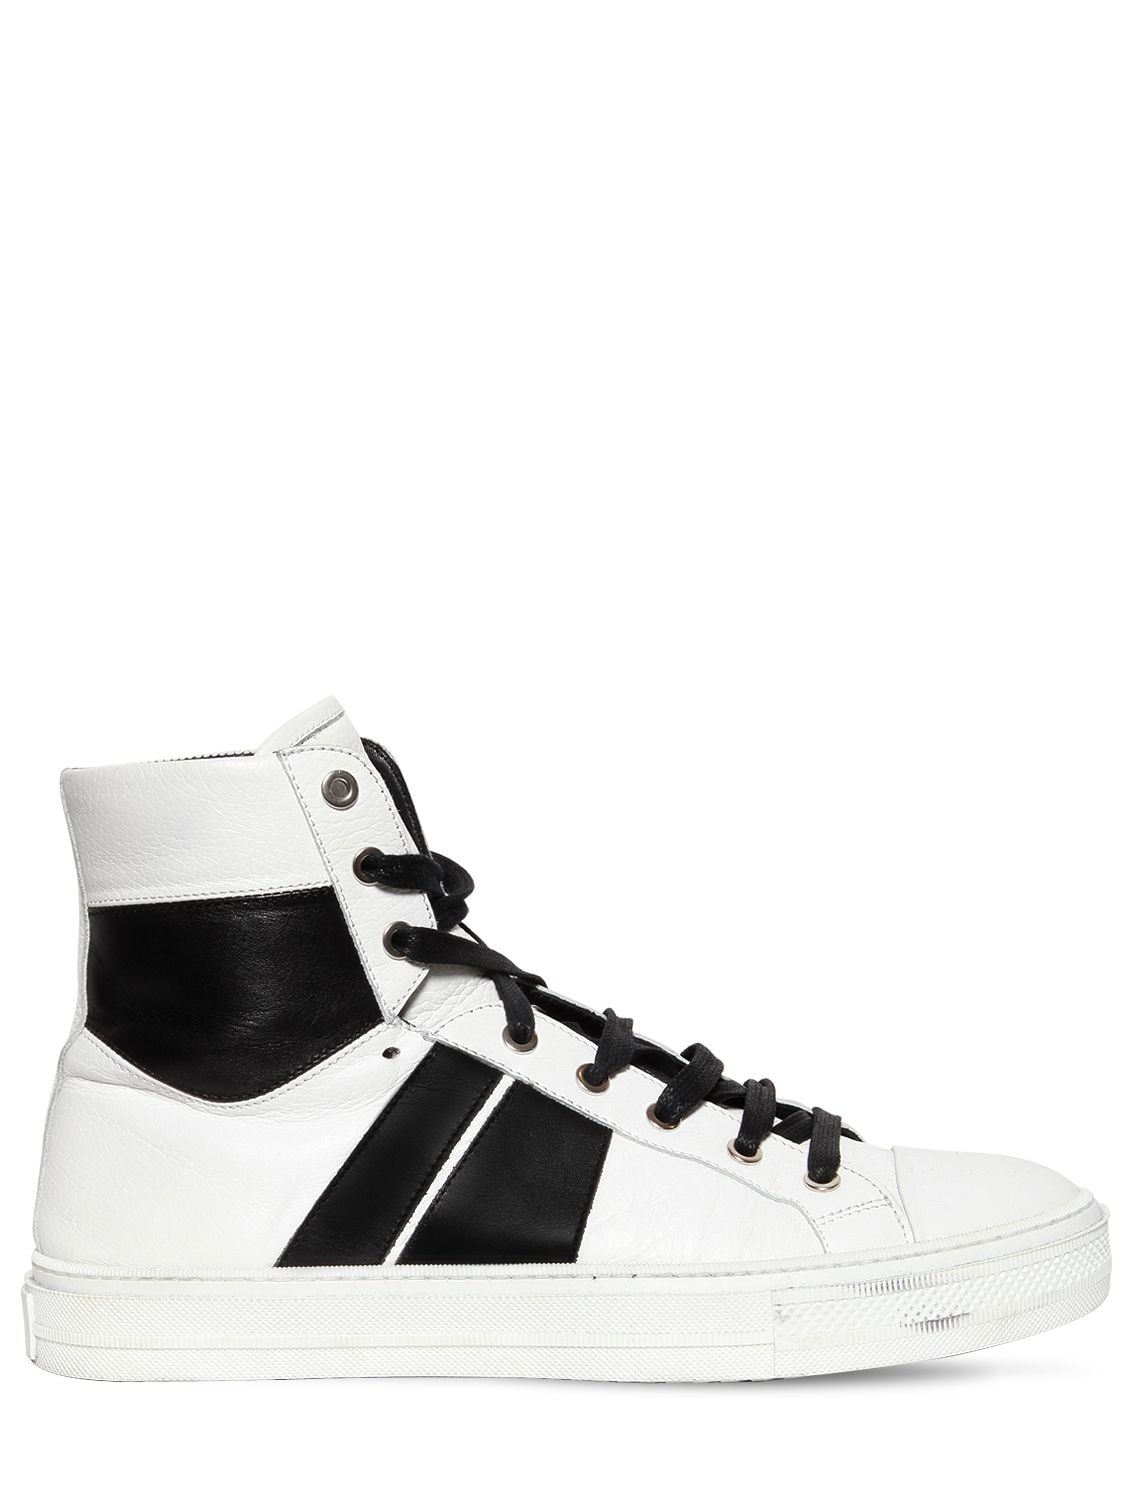 Amiri Sunset Leather High Top Sneakers In White/black | ModeSens